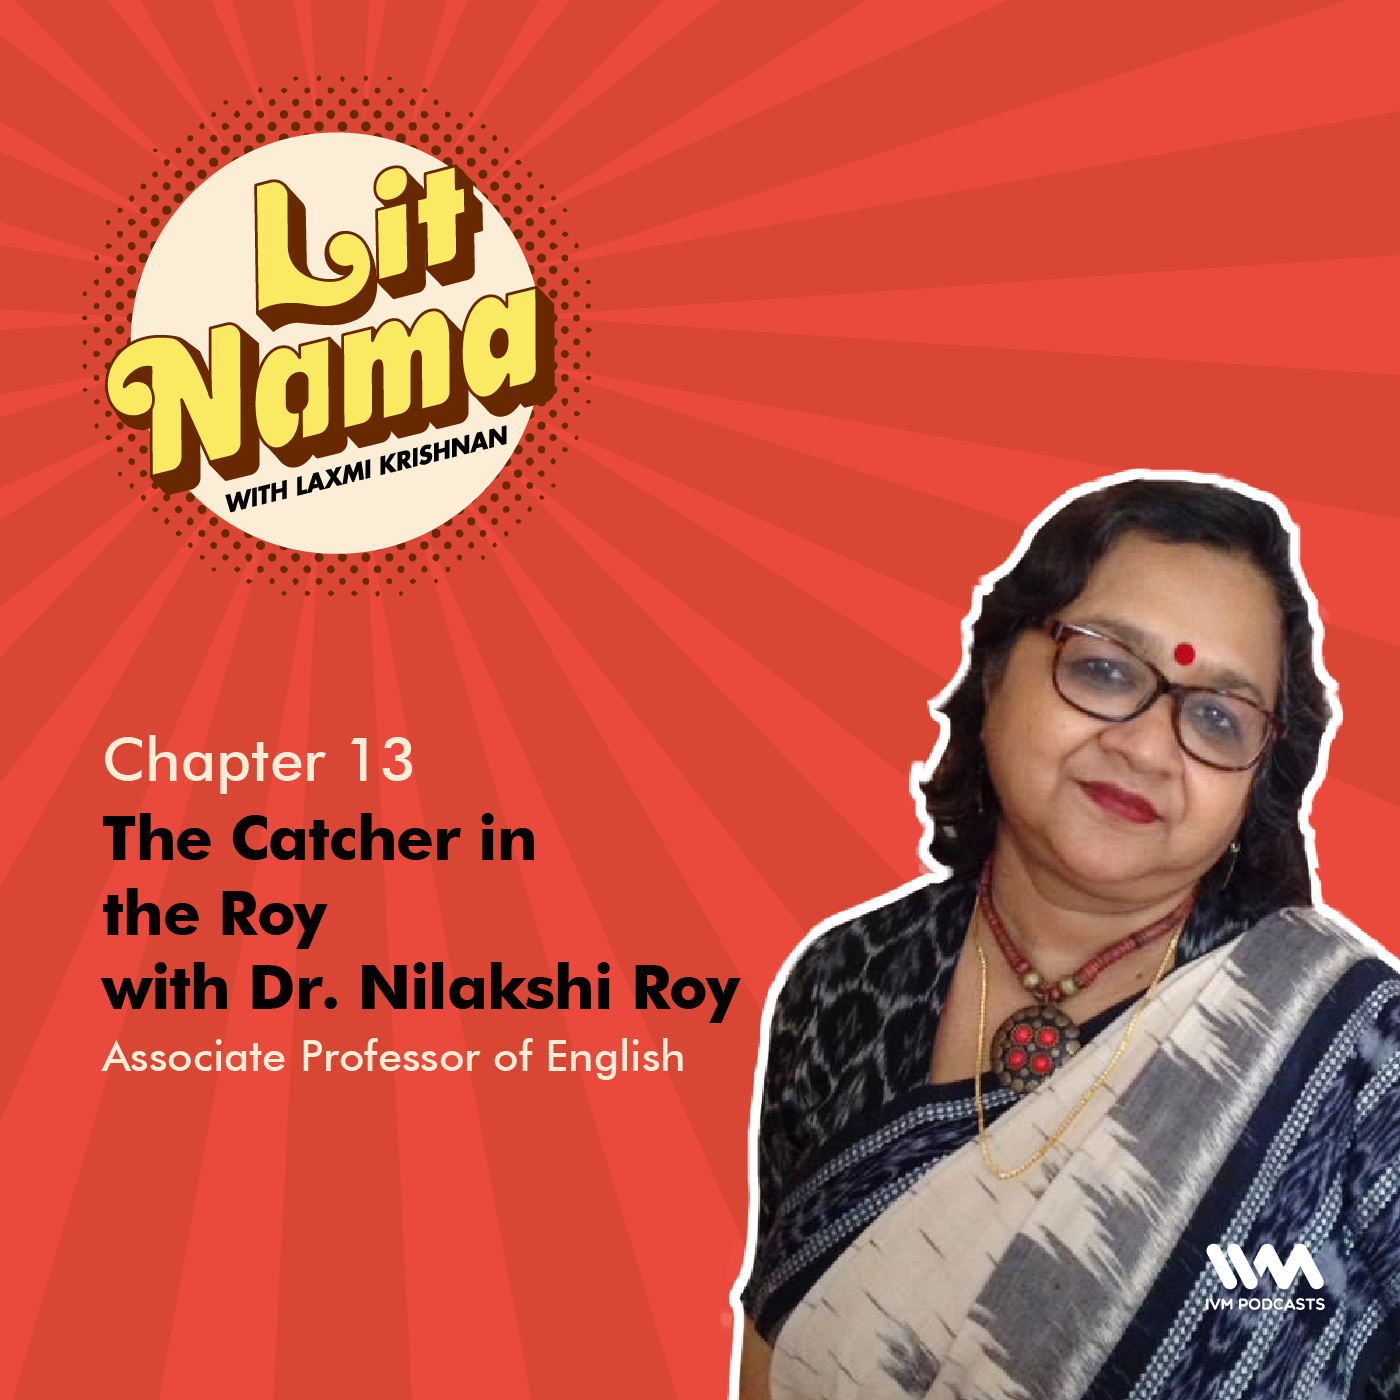 Chapter. 13: The Catcher in the Roy with Dr. Nilakshi Roy